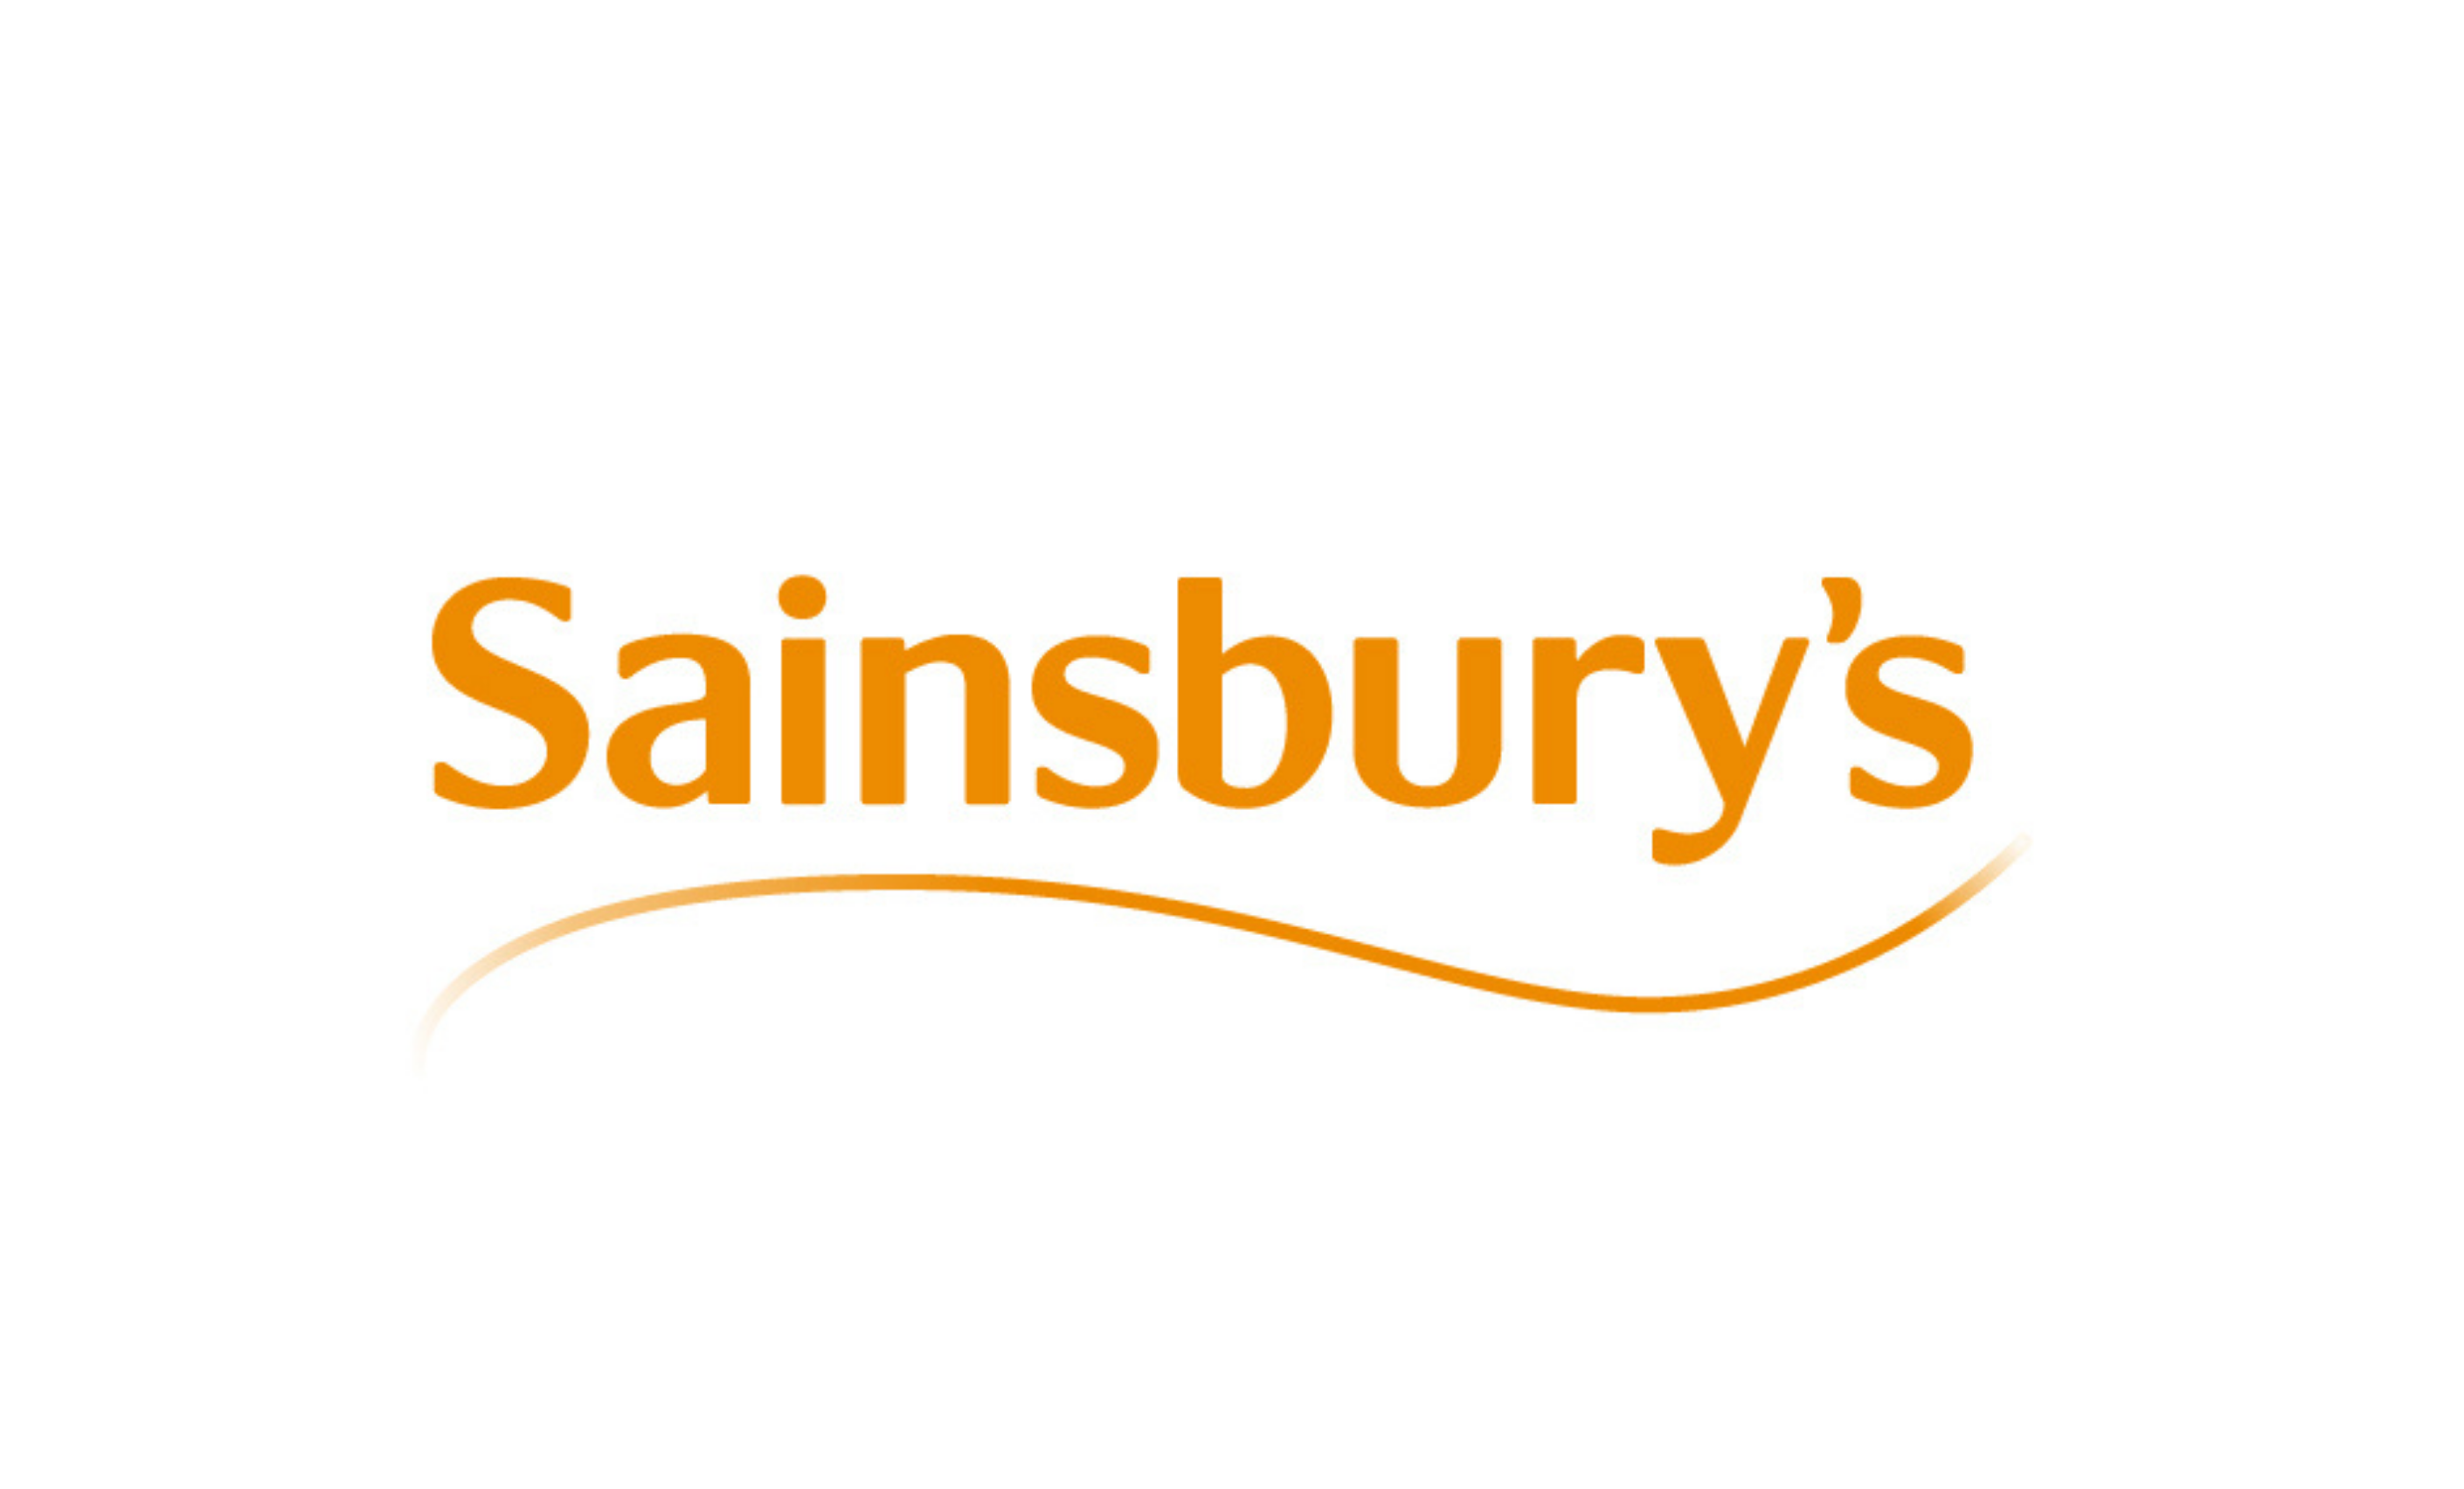 NEWS | Sainsbury’s has confirmed it will keep all stores shut this Boxing Day